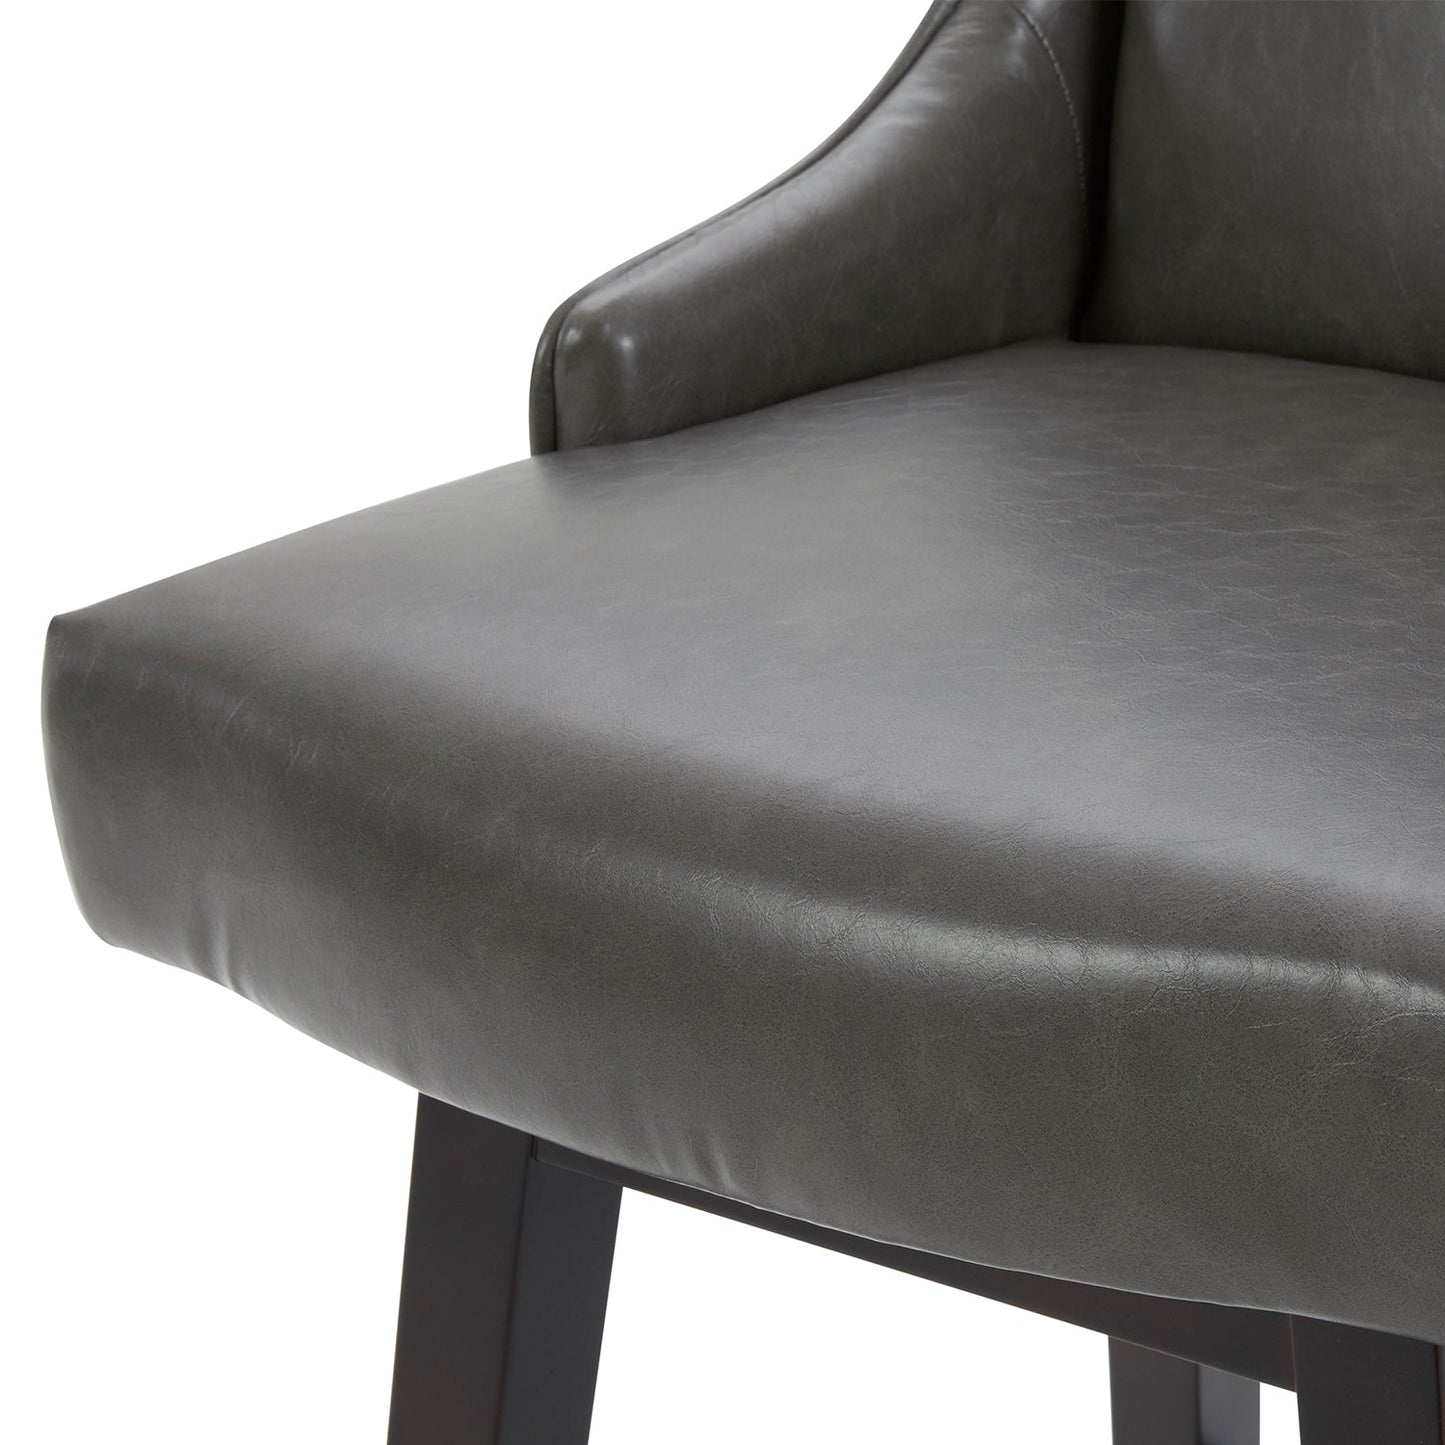 CHITA LIVING-Ryker Transitional Swivel Counter Stool - Fabric & Leather-Counter Stools-Faux Leather-Retro Gray-2 Pack